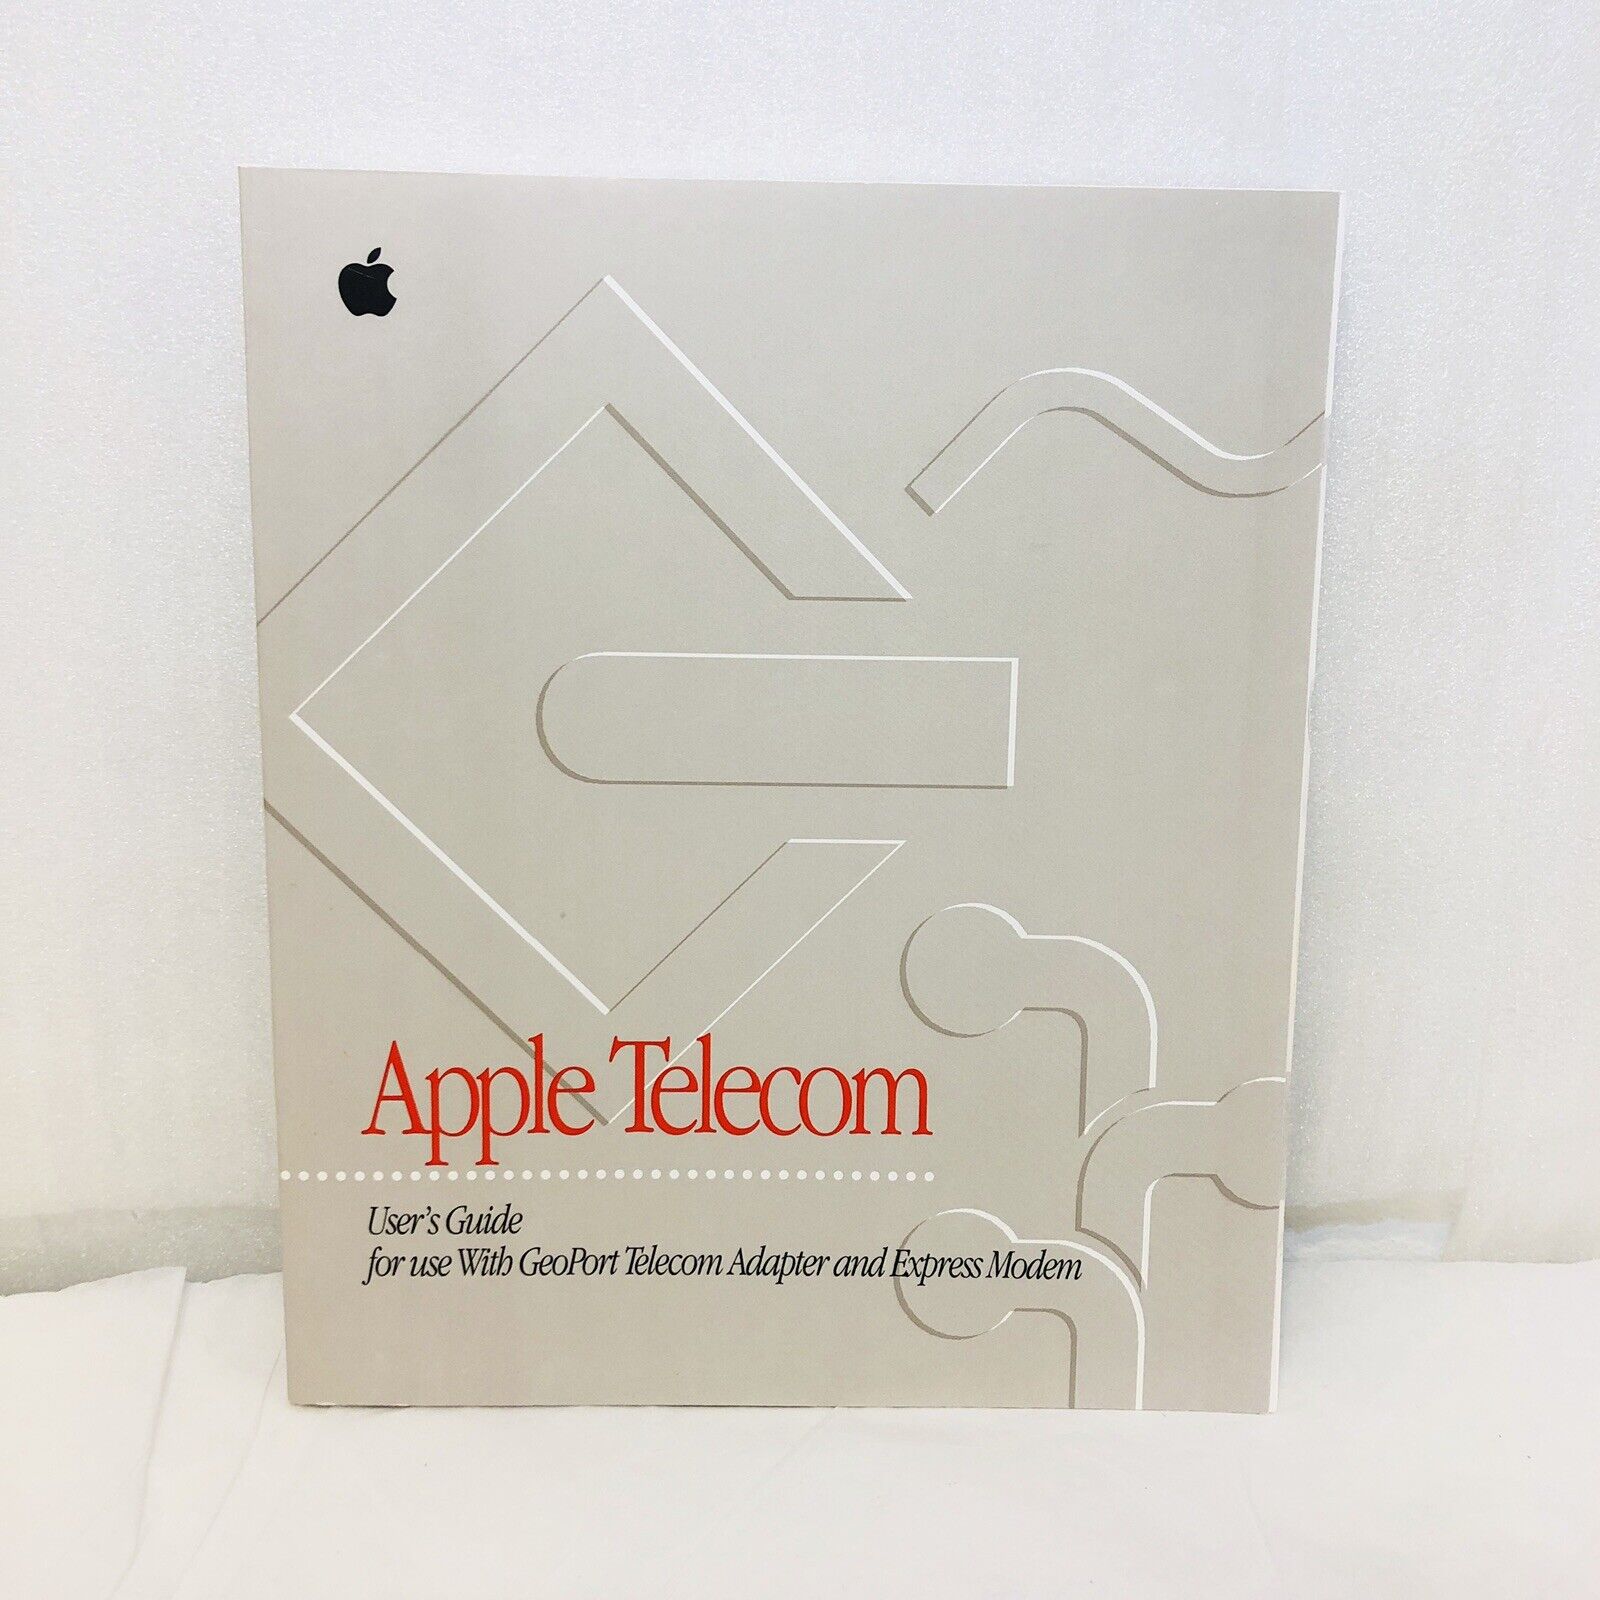 Vintage 1994 Apple Telecom User's Guide for Use with Geoport Telecom Adapter and